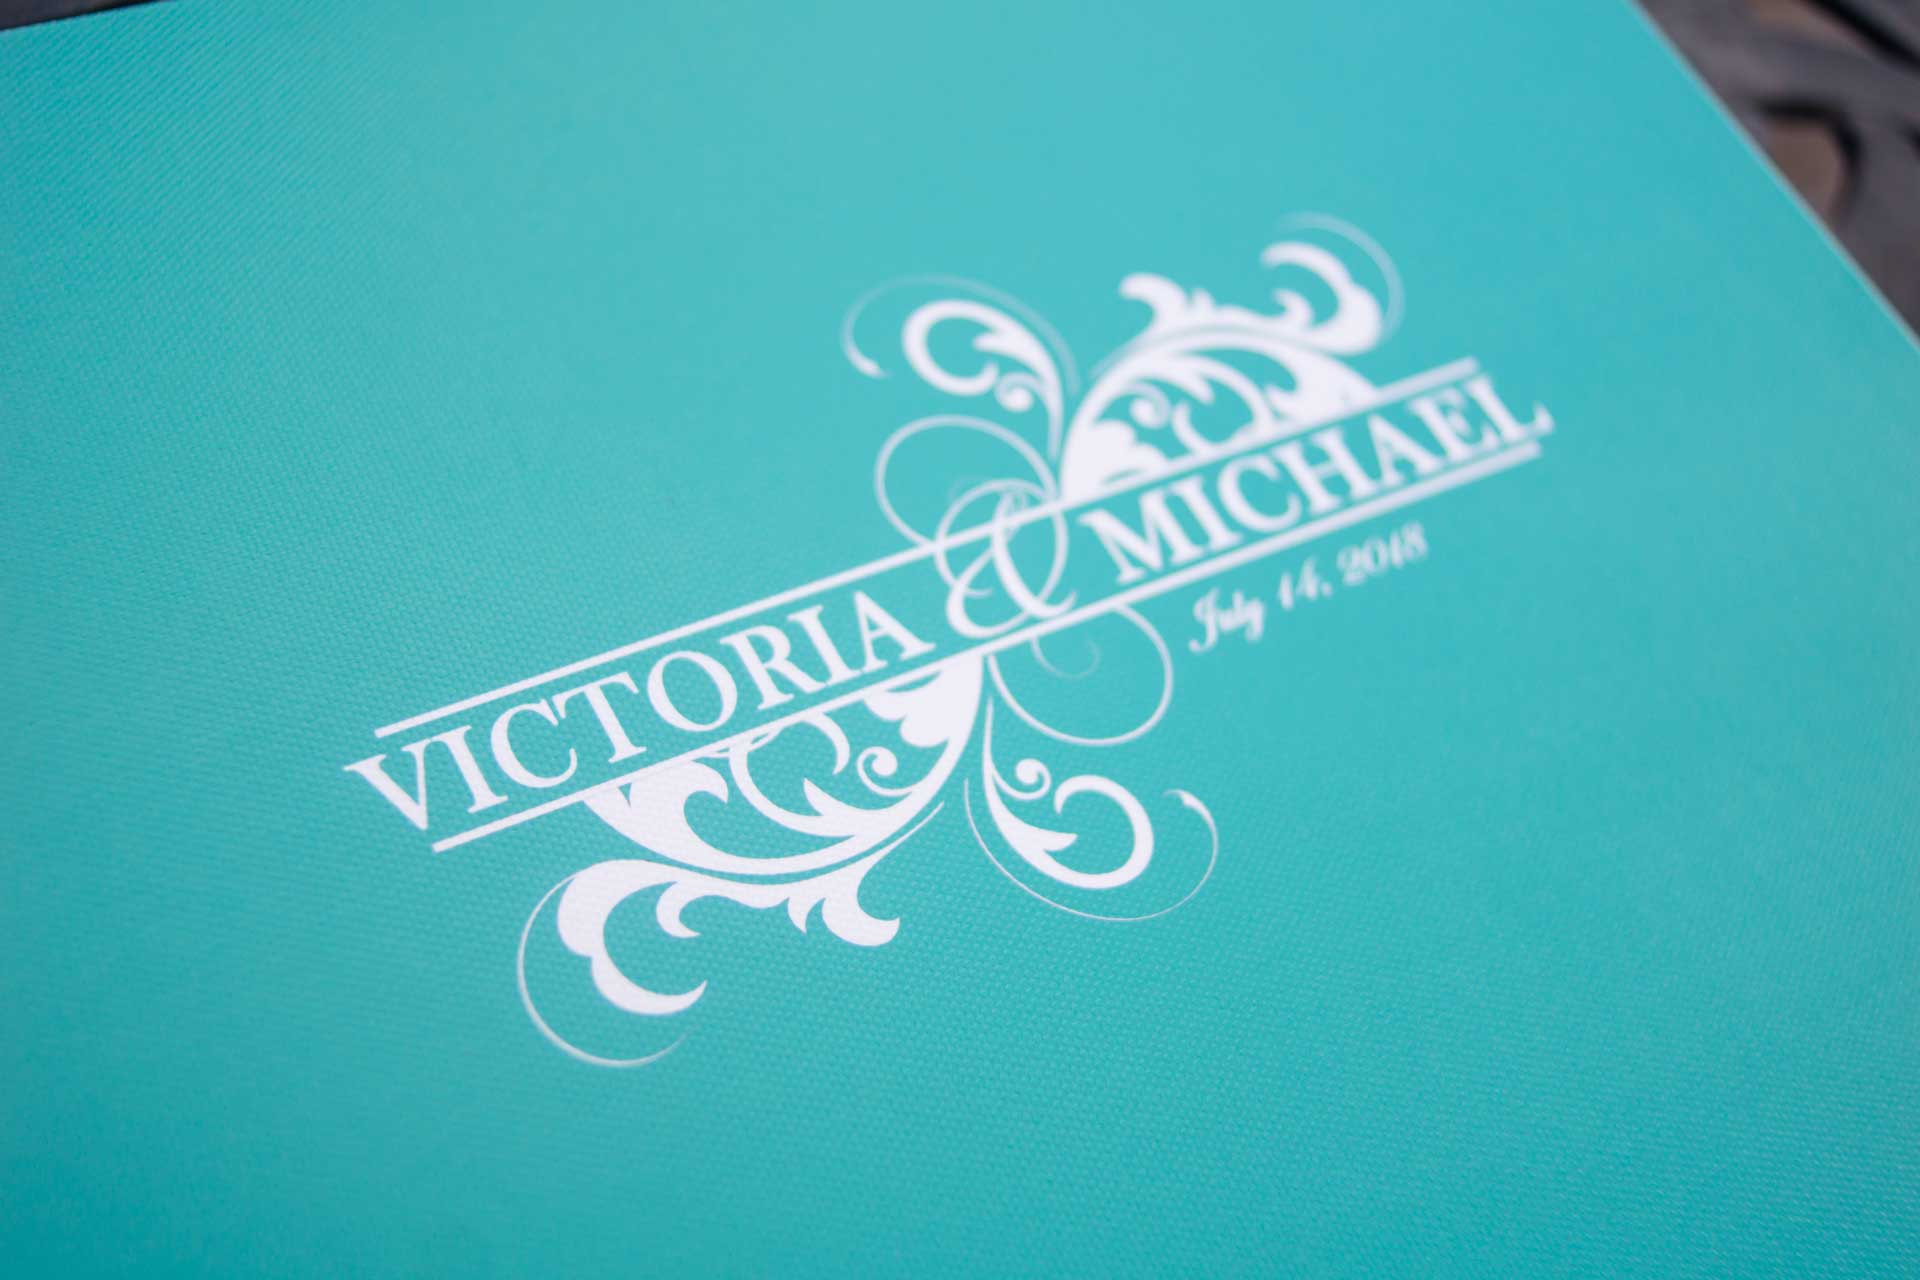 Creating a personalized monogram on a colorful canvas cover is a unique way to personalize an album.